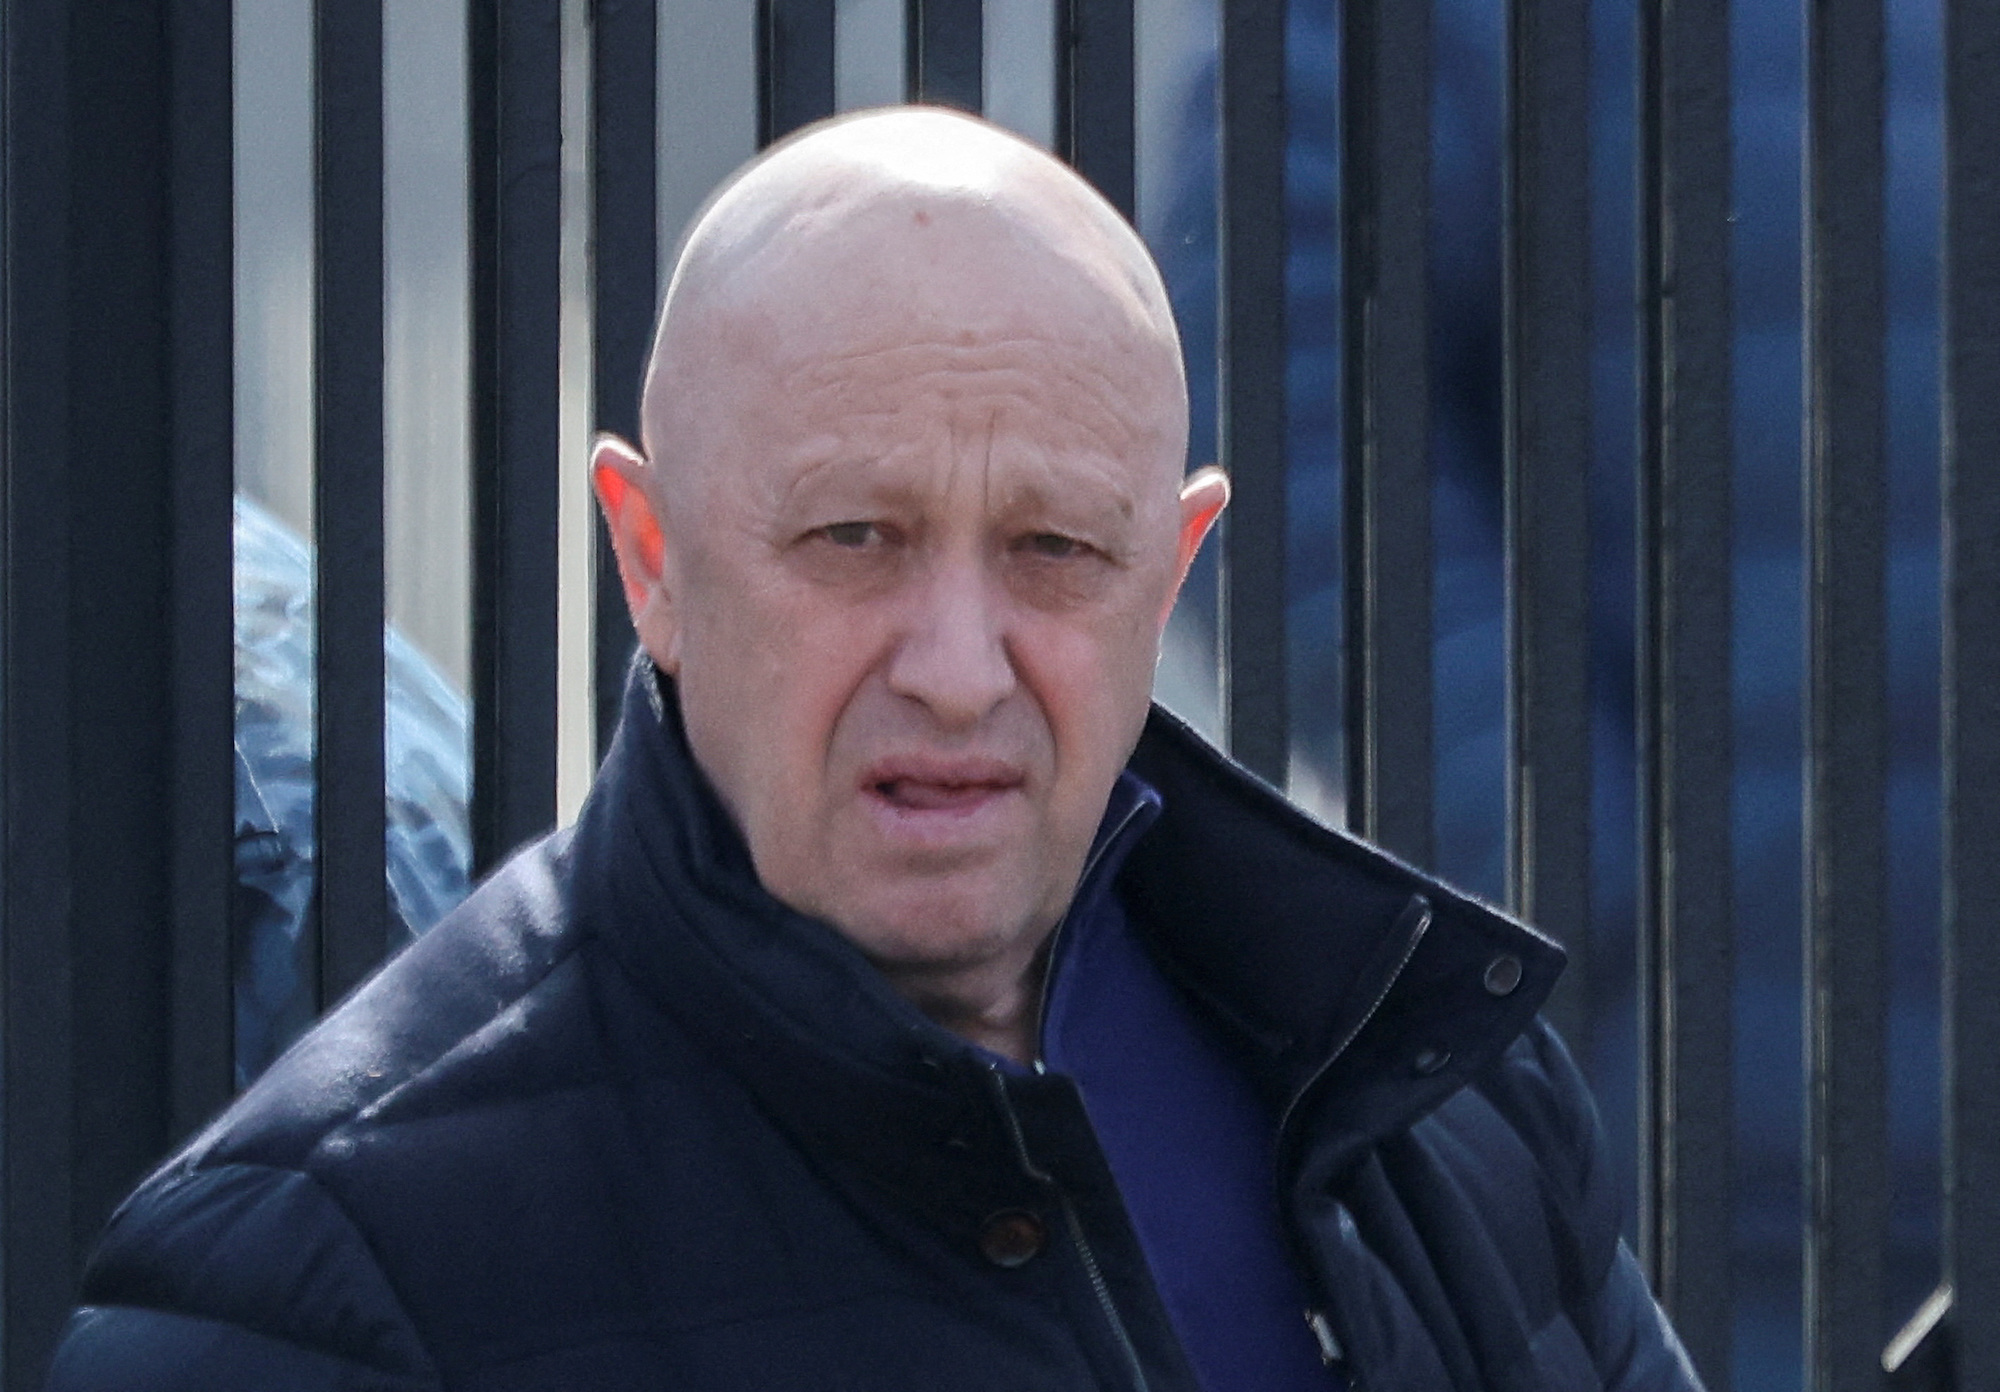 Yevgeny Prigozhin is seen in Moscow on April 8.